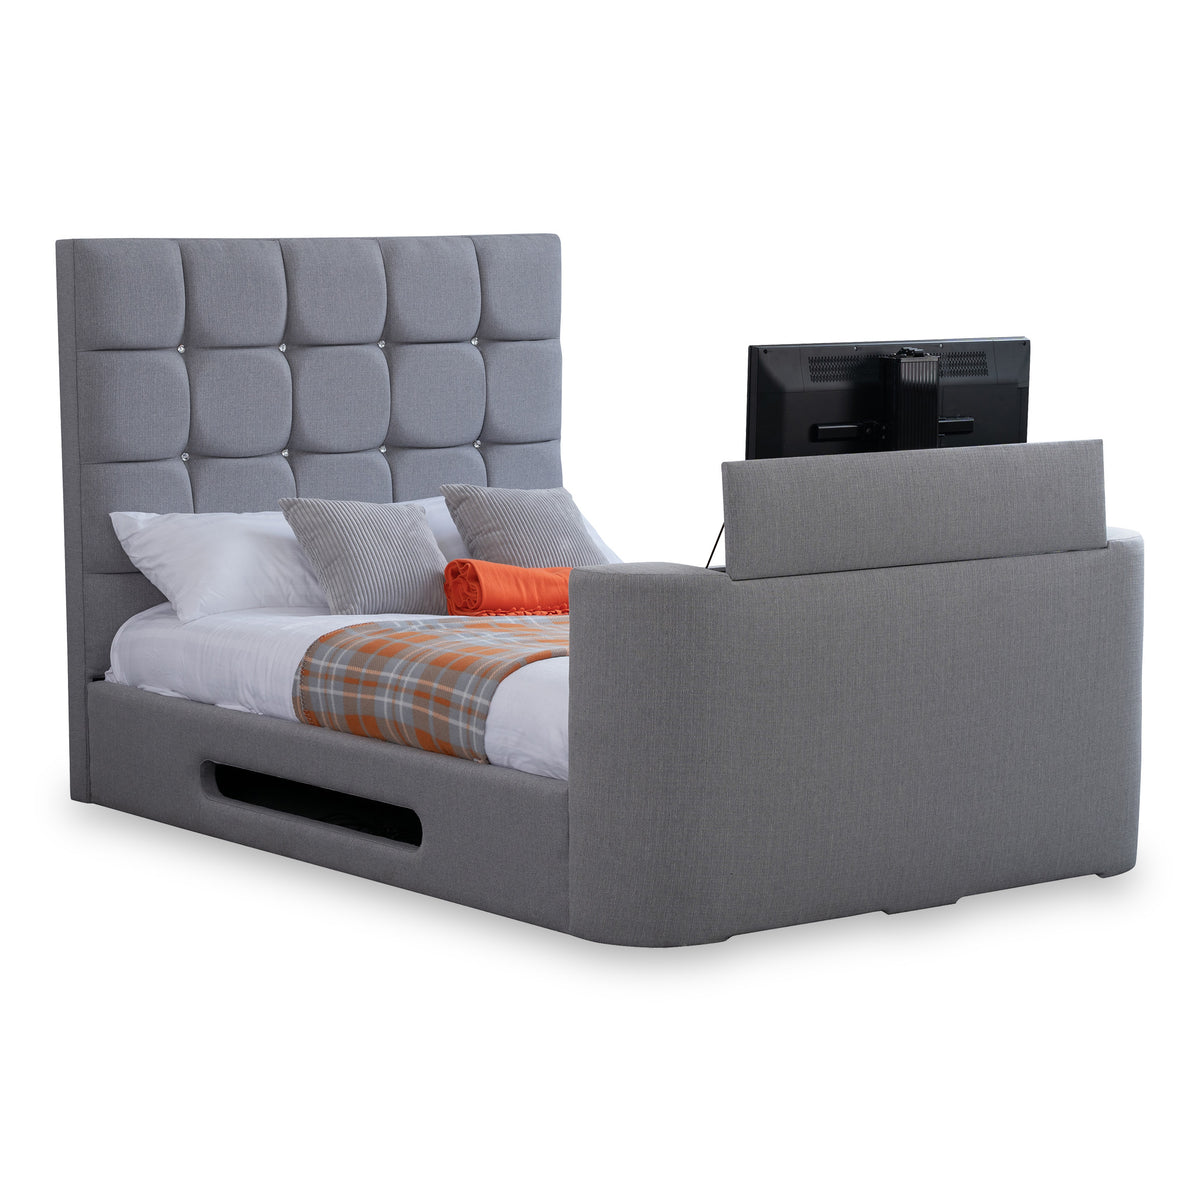 Hawkins Faux Linen TV Bed in Ash by Roseland Furniture